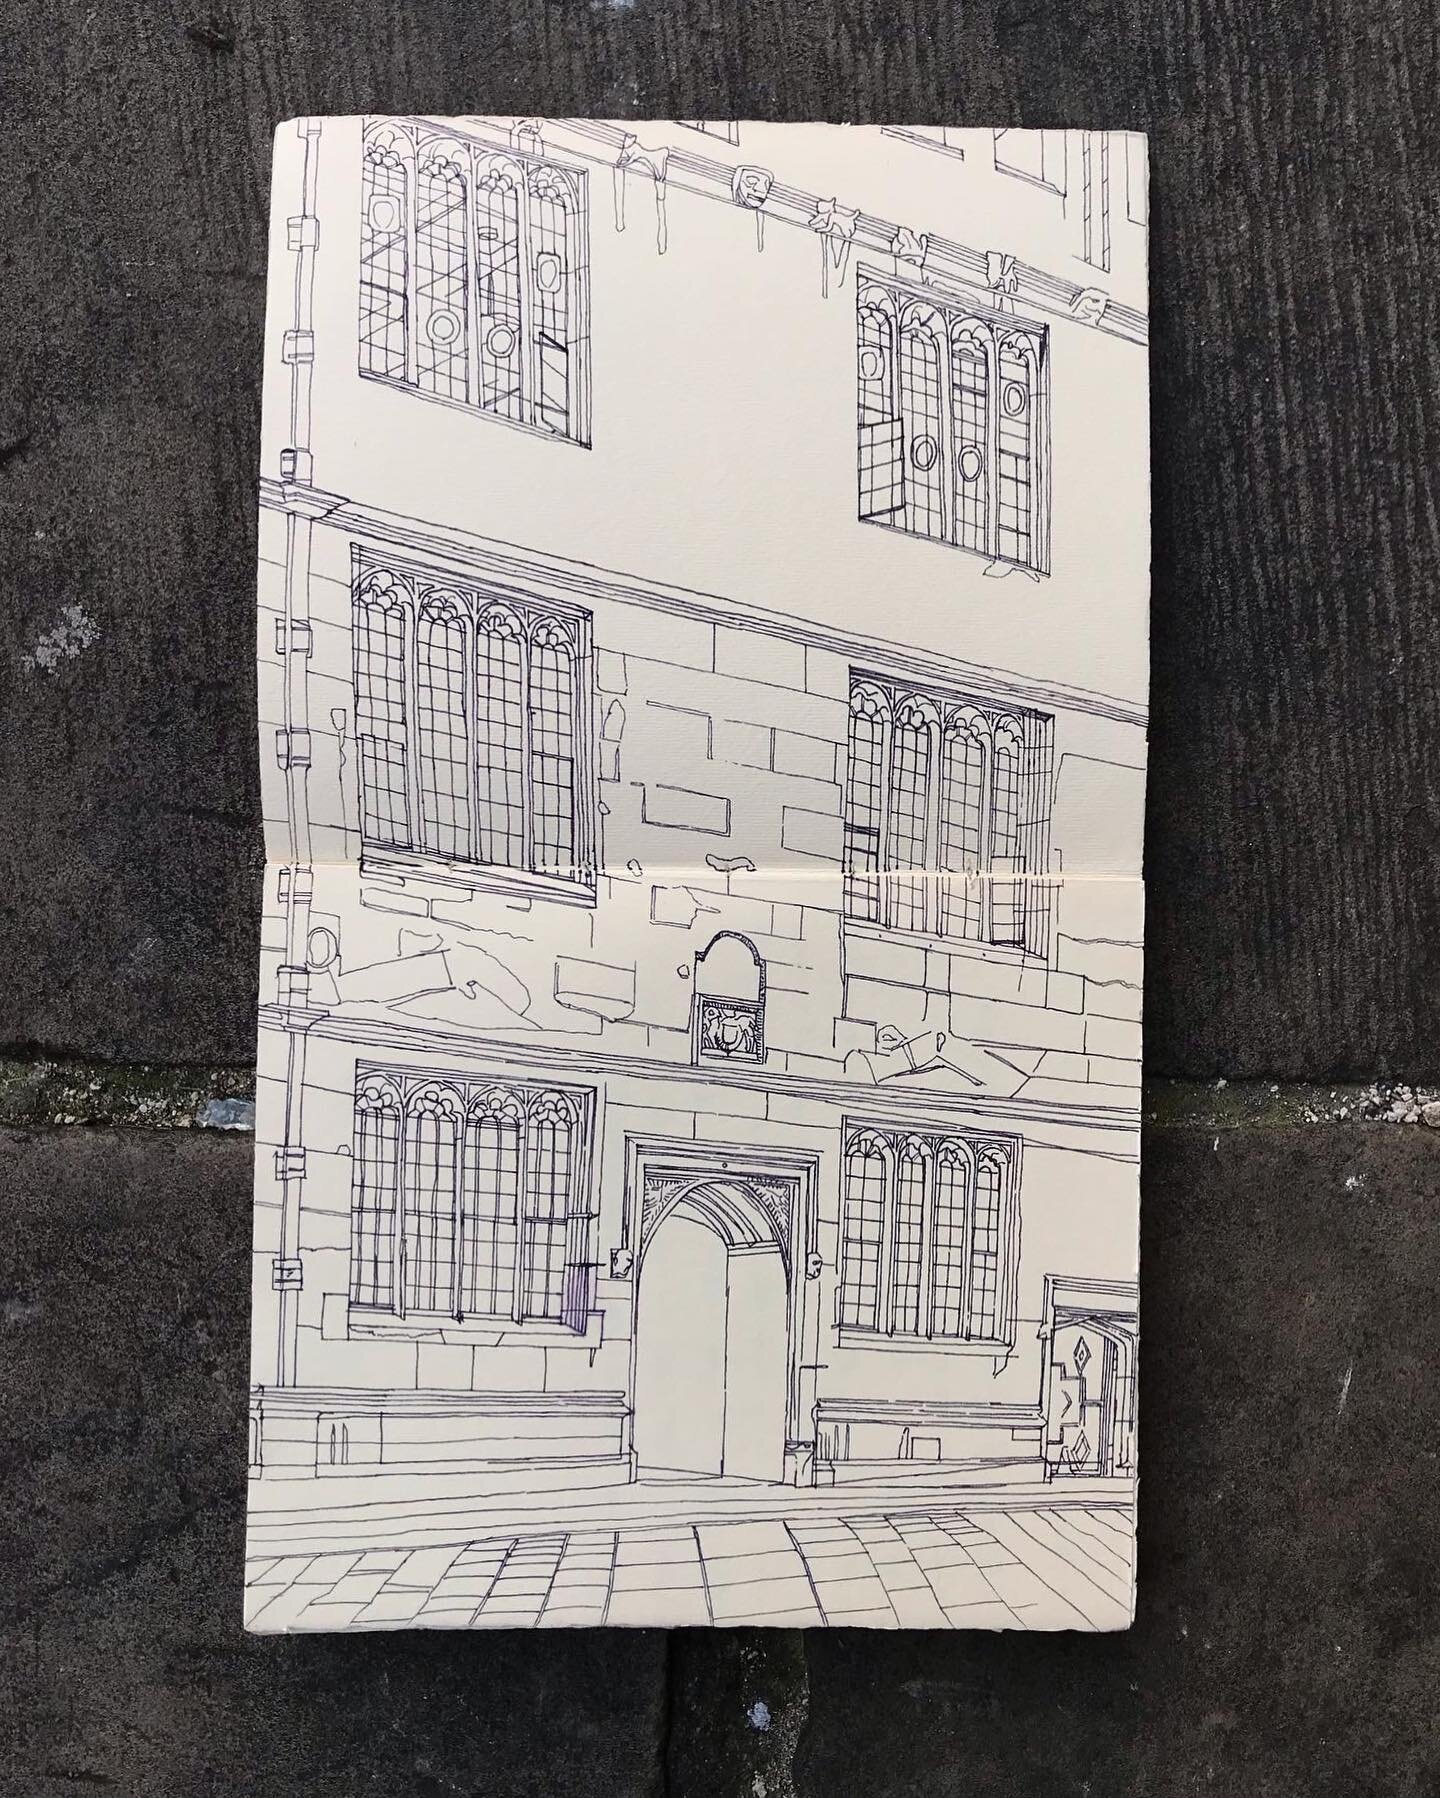 In celebration of Sir Thomas Bodley (founder of the Bodleian Libraries) birthday today I picked the Old Library, across the street from my office for my next life drawing. I didn&rsquo;t plan the composition much but loved how the three floors across